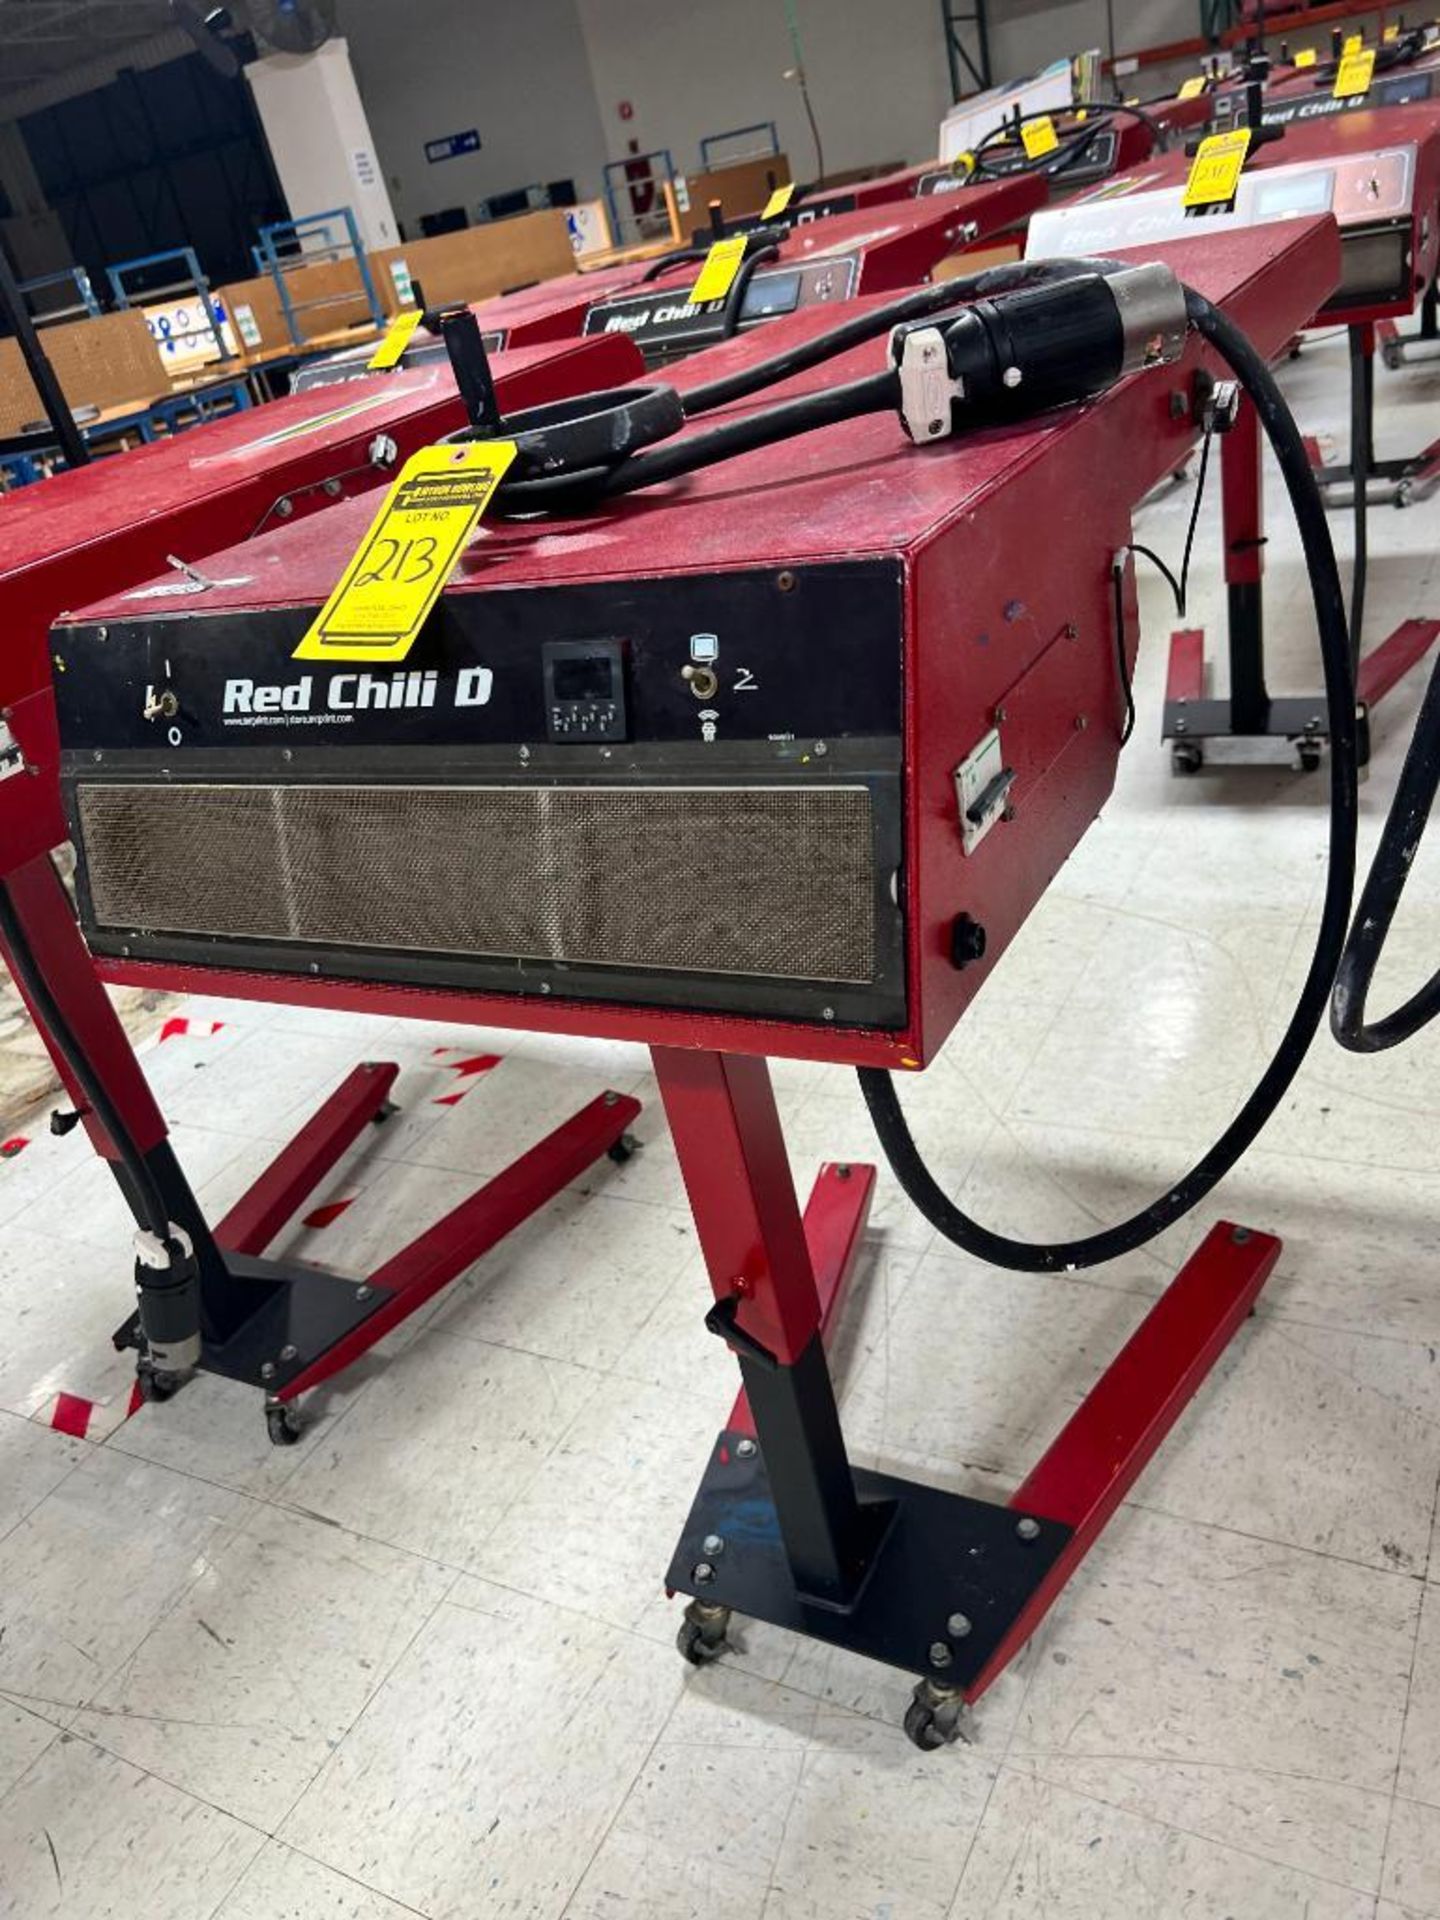 Red Chili D Flash Dryer, Model REDD20242036A, S/N 374695164R, 3 Phase - Image 2 of 3